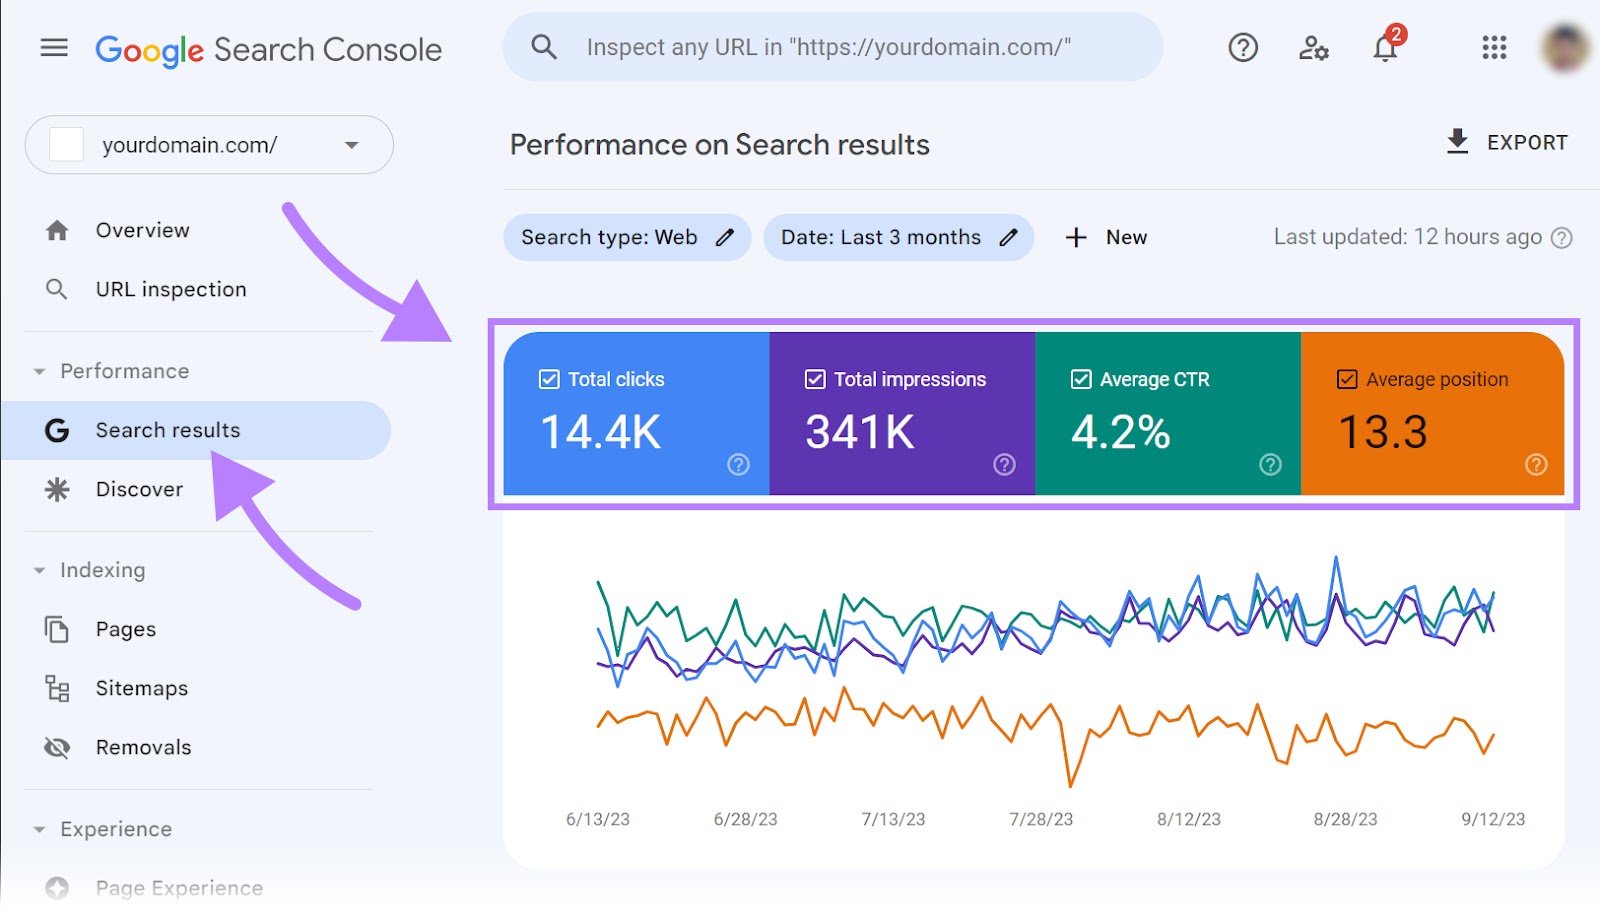 Performance on search results report in Google Search Console